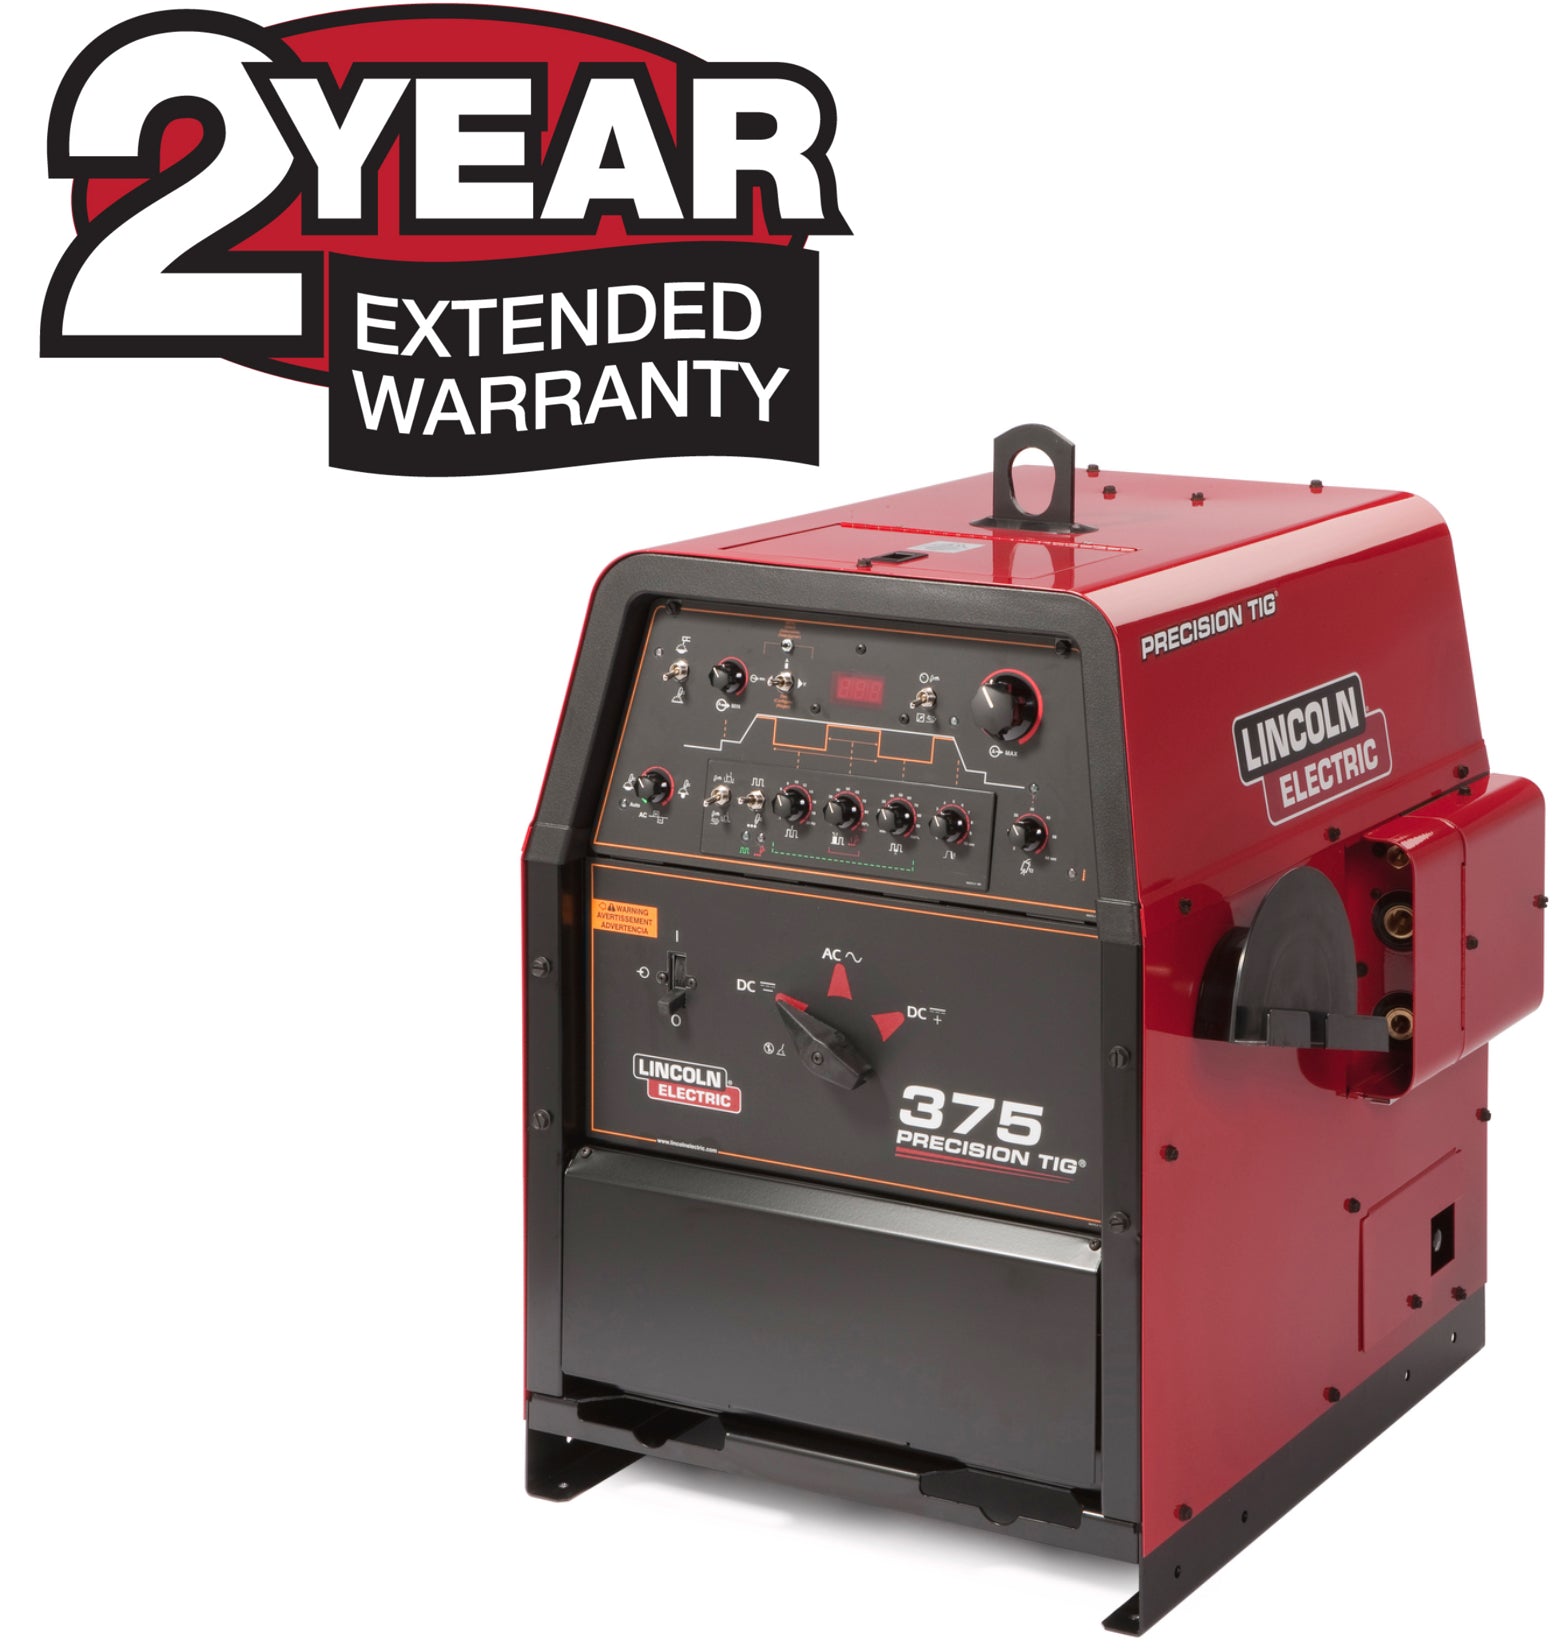 Lincoln 2-Year Extended Warranty - Precision TIG 375 X2622